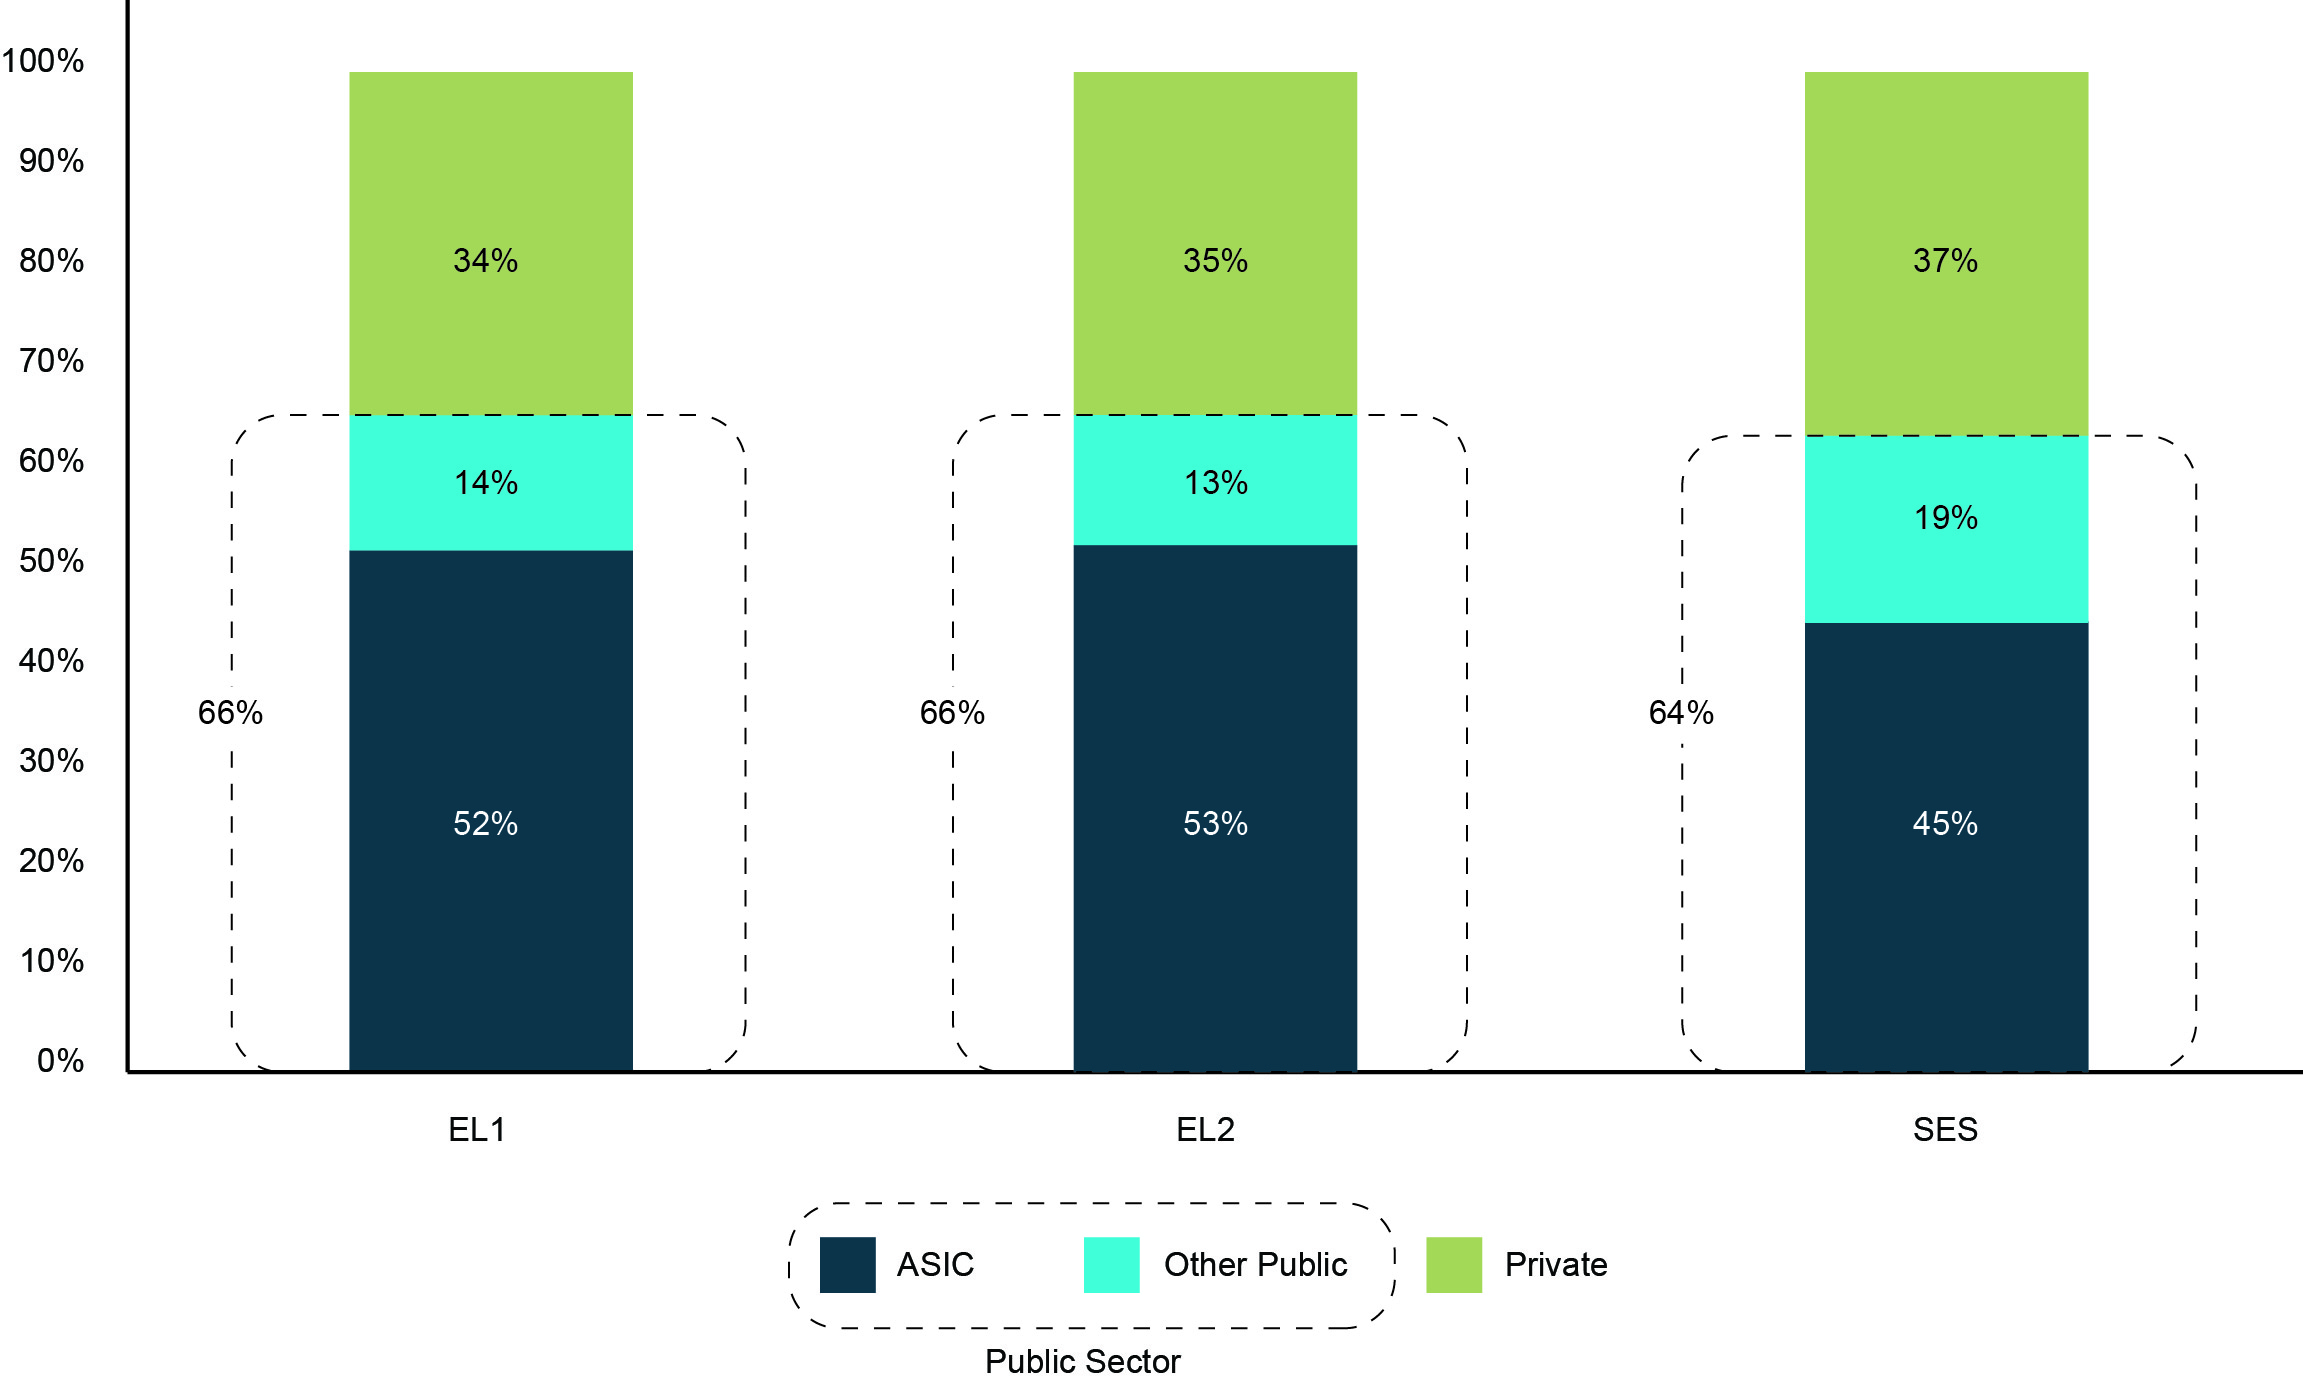 Figure 26: Professional experience (of working life) by sector (private, public or ASIC)